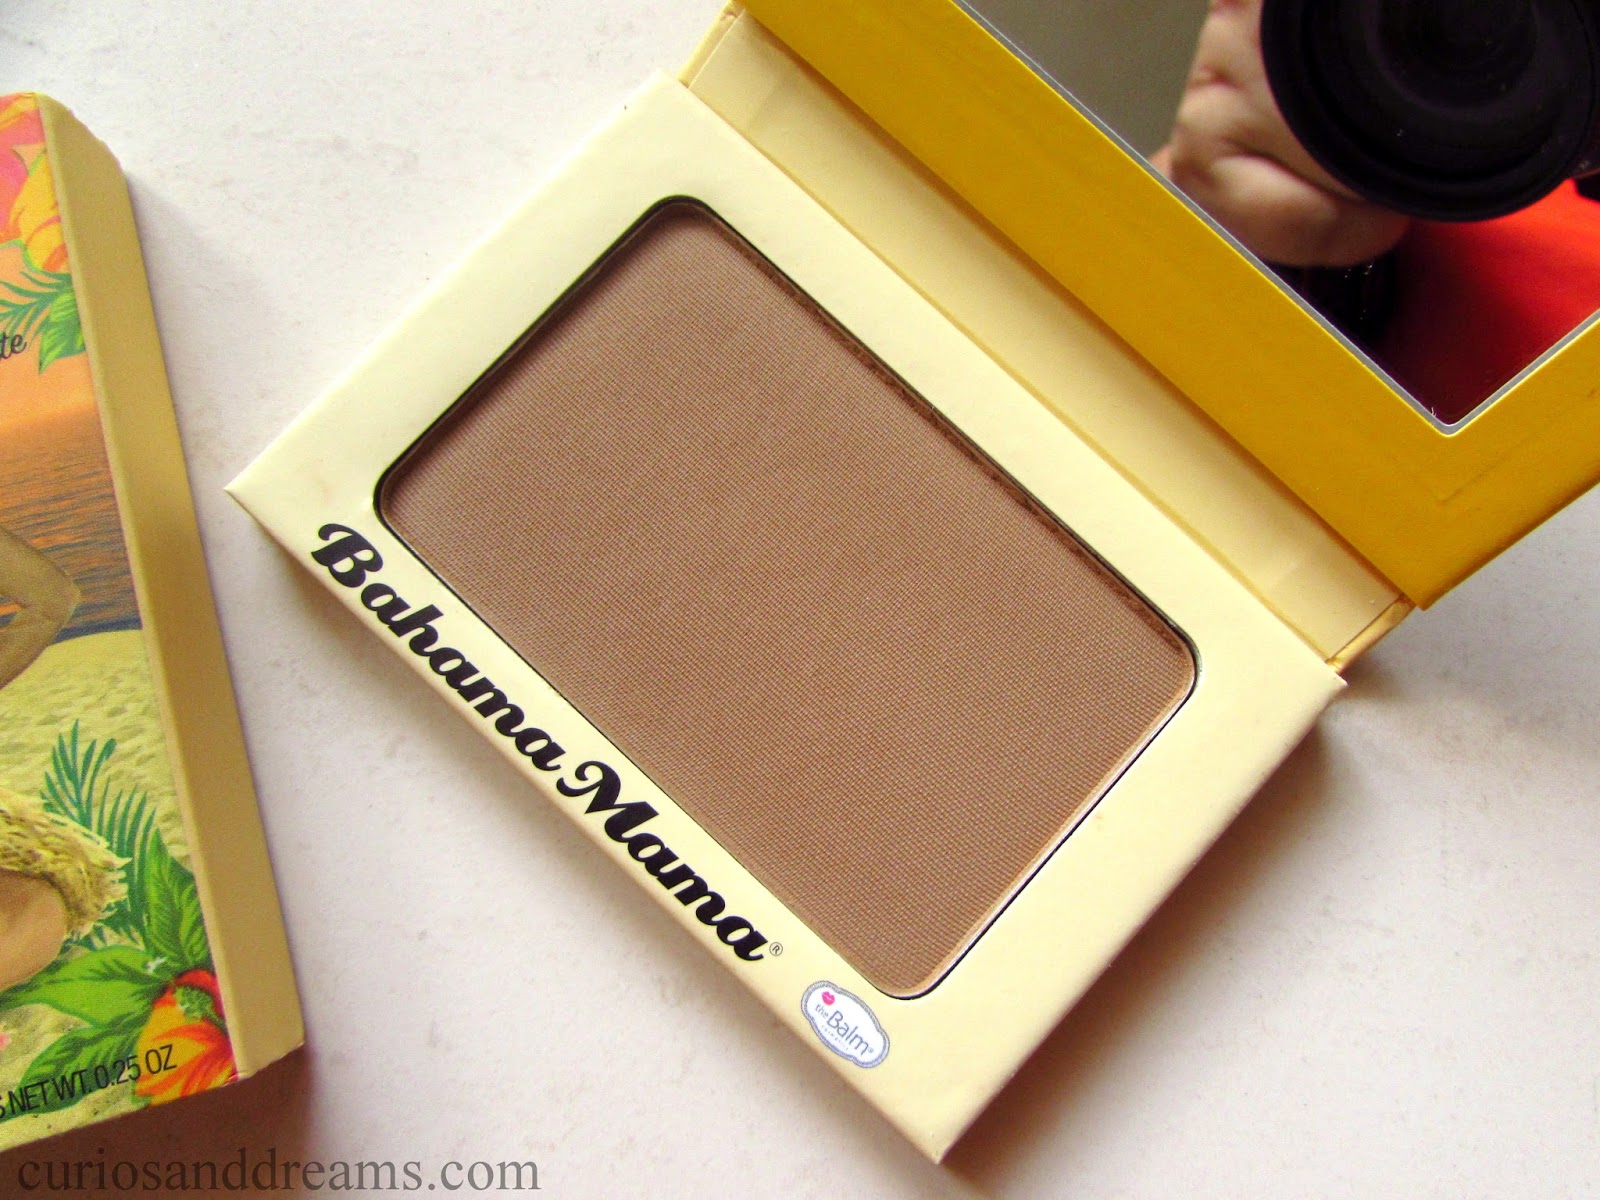 theBalm Bahama : Swatches, Review - Curios and Dreams - Indian Skincare and Beauty